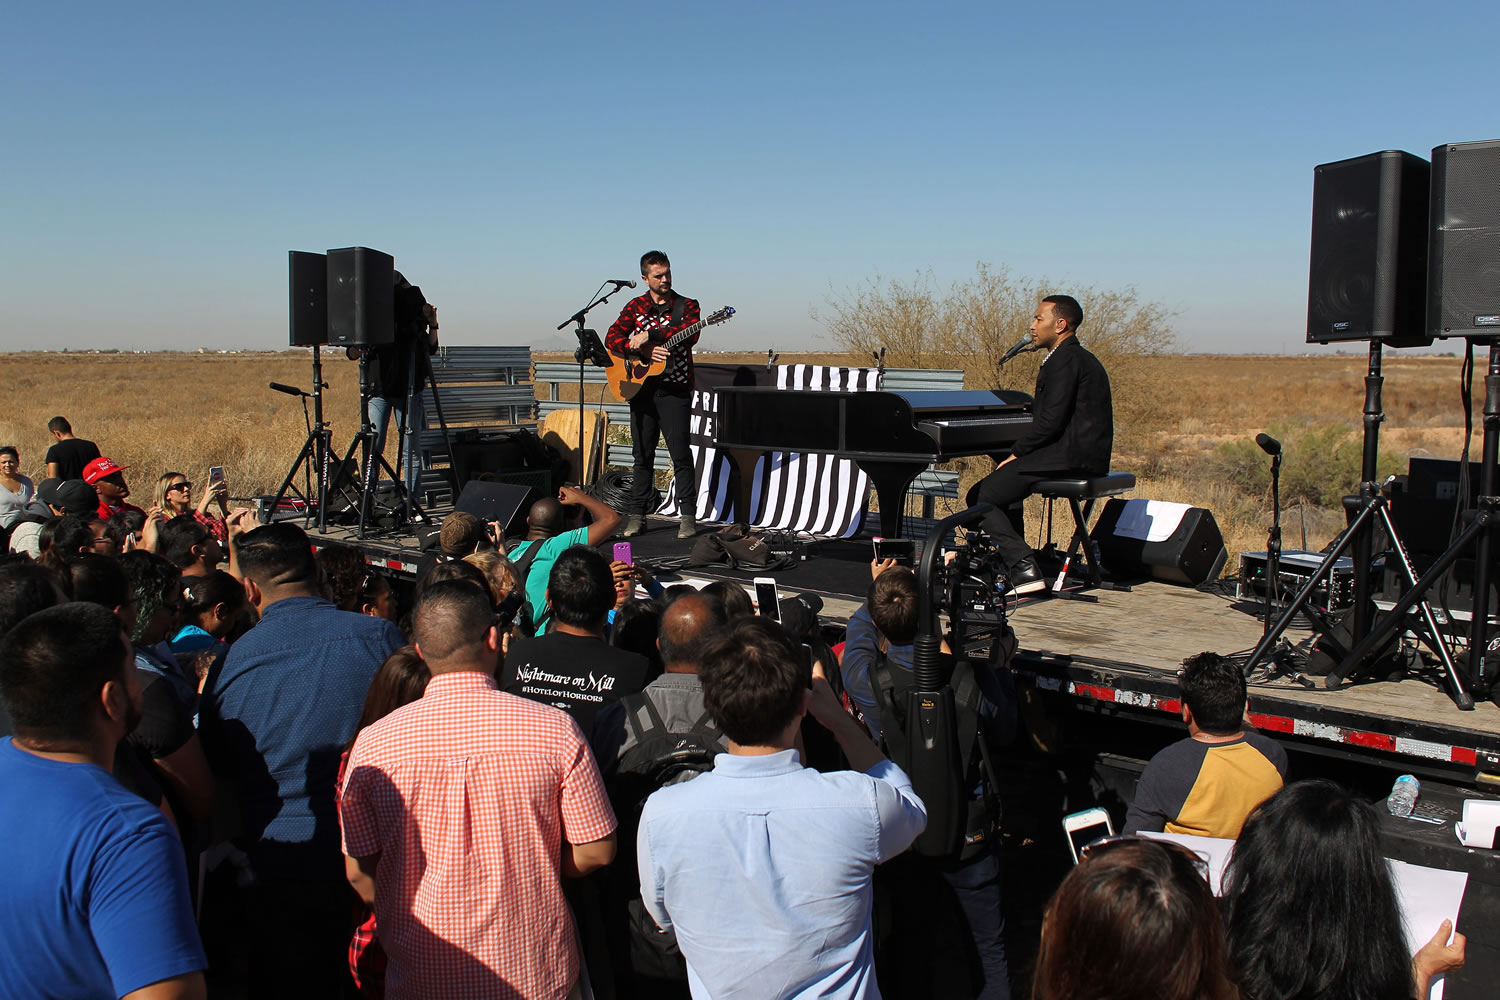 John Legend, right, and Colombian rock star Juanes perform over a flat bed truck platform in front of a detention center in Eloy, Ariz., on Wednesday. The artists performed in front of some 250 people in protest against massive migrant deportations as part of the Legends&#039; campaign #FREEAMERICA.